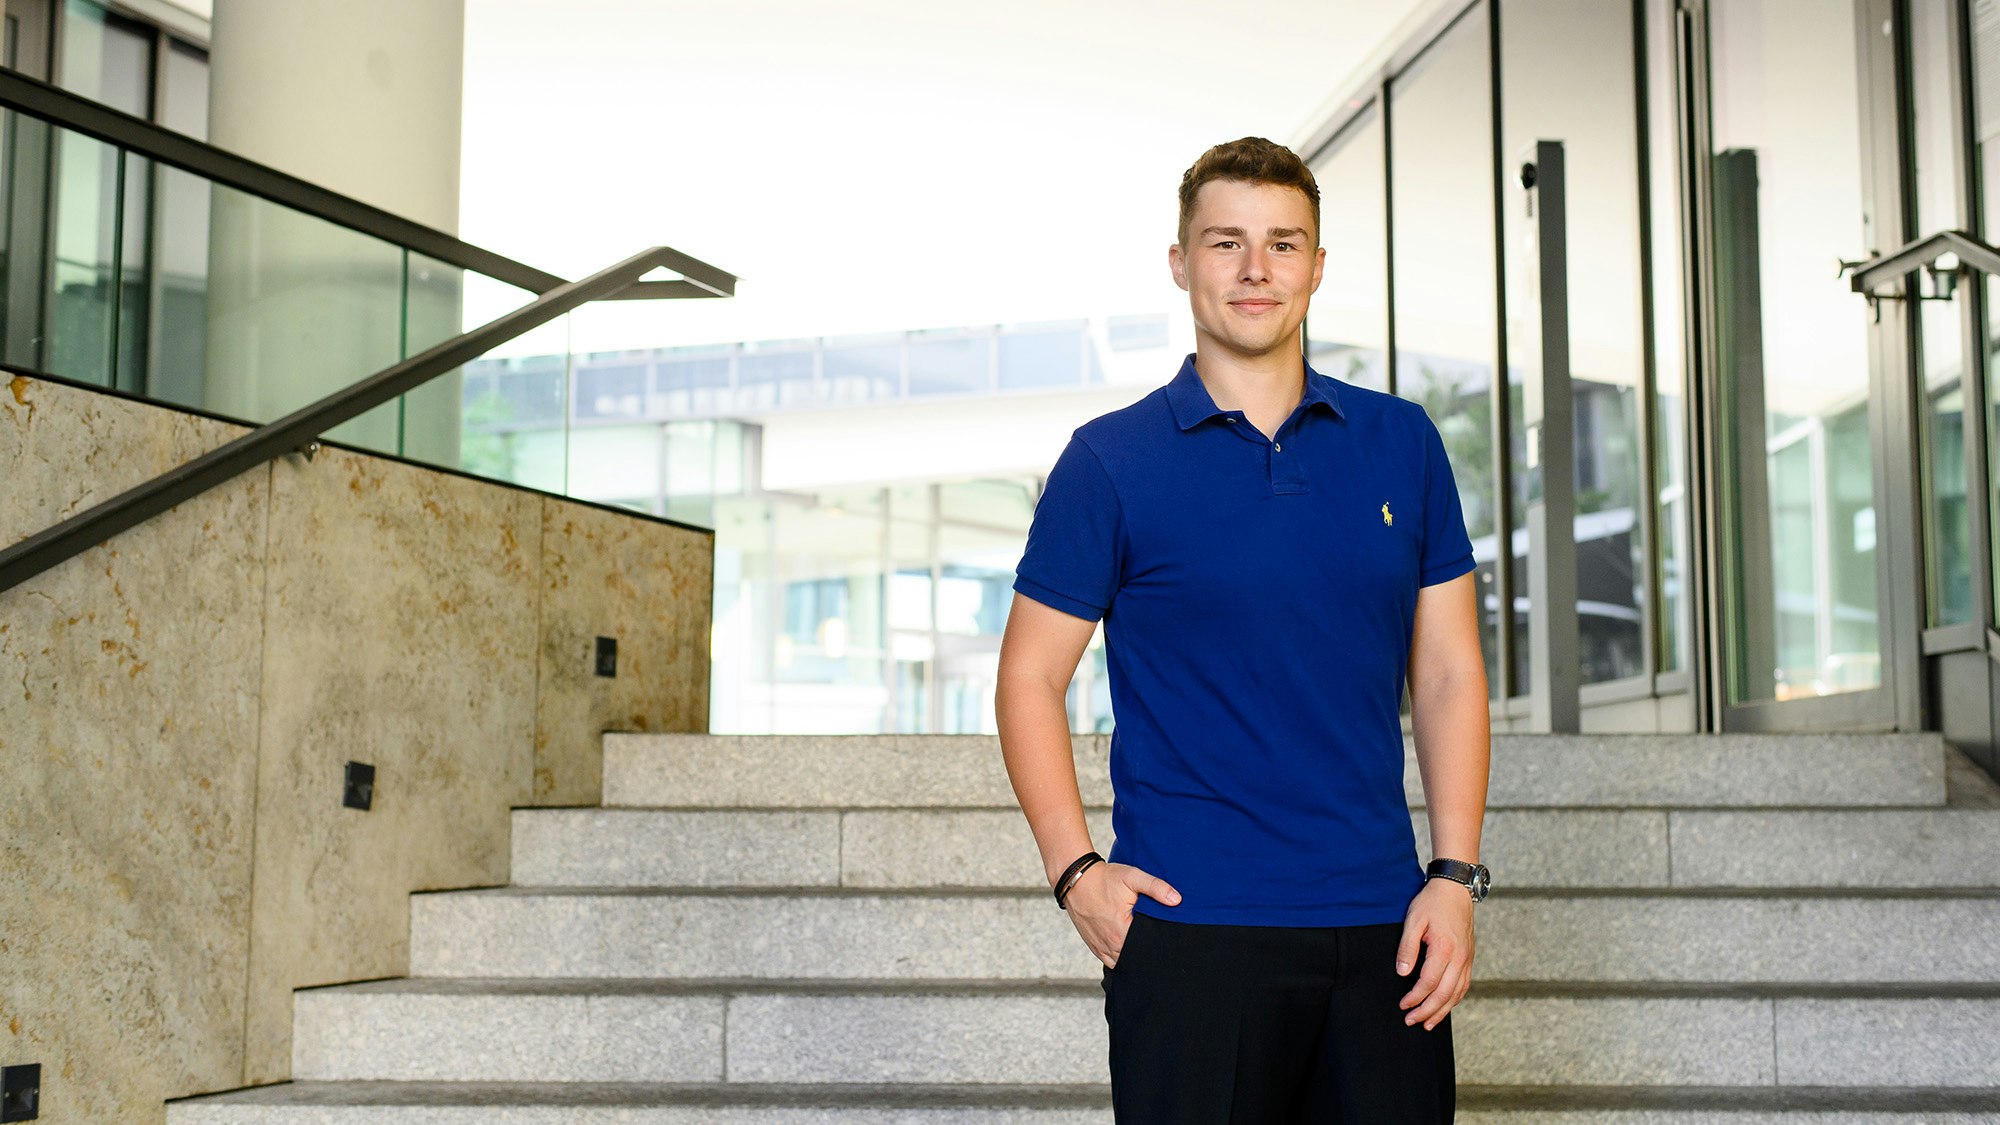 Arne Kupfer in a blue polo shirt, outside on a staircase of an office building.